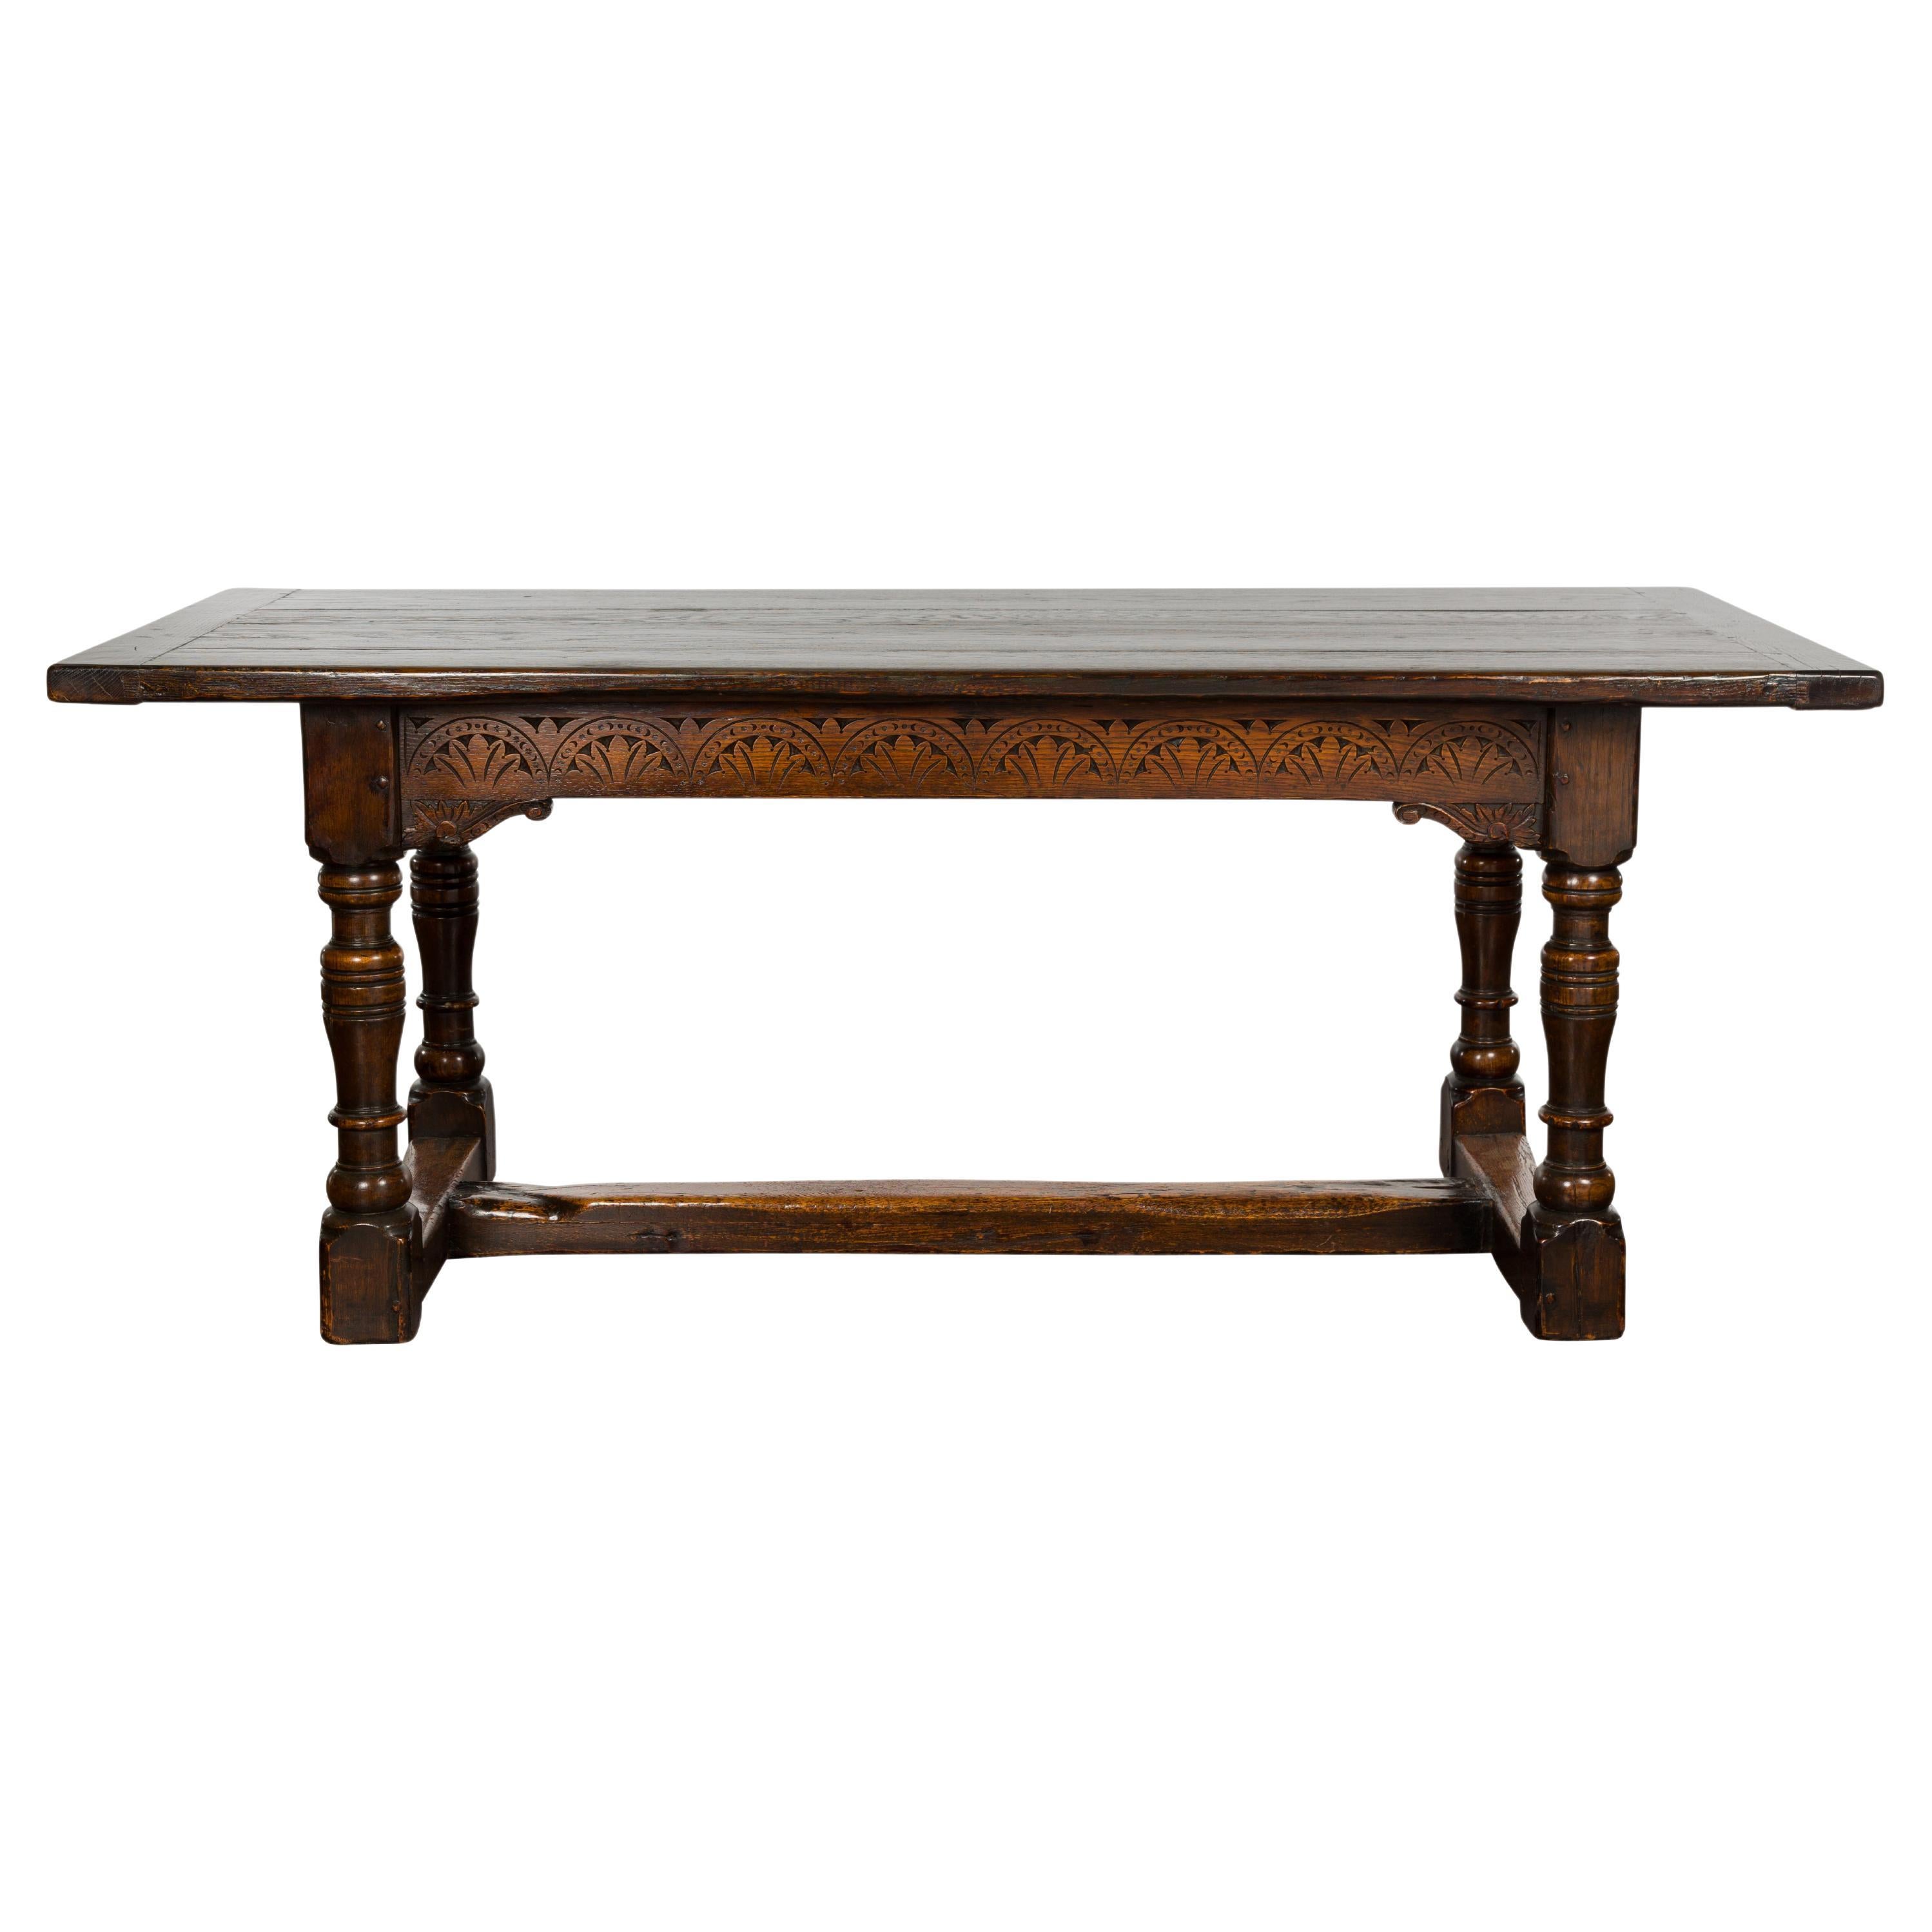 19th Century English Oak Table with Carved Apron and Turned Legs